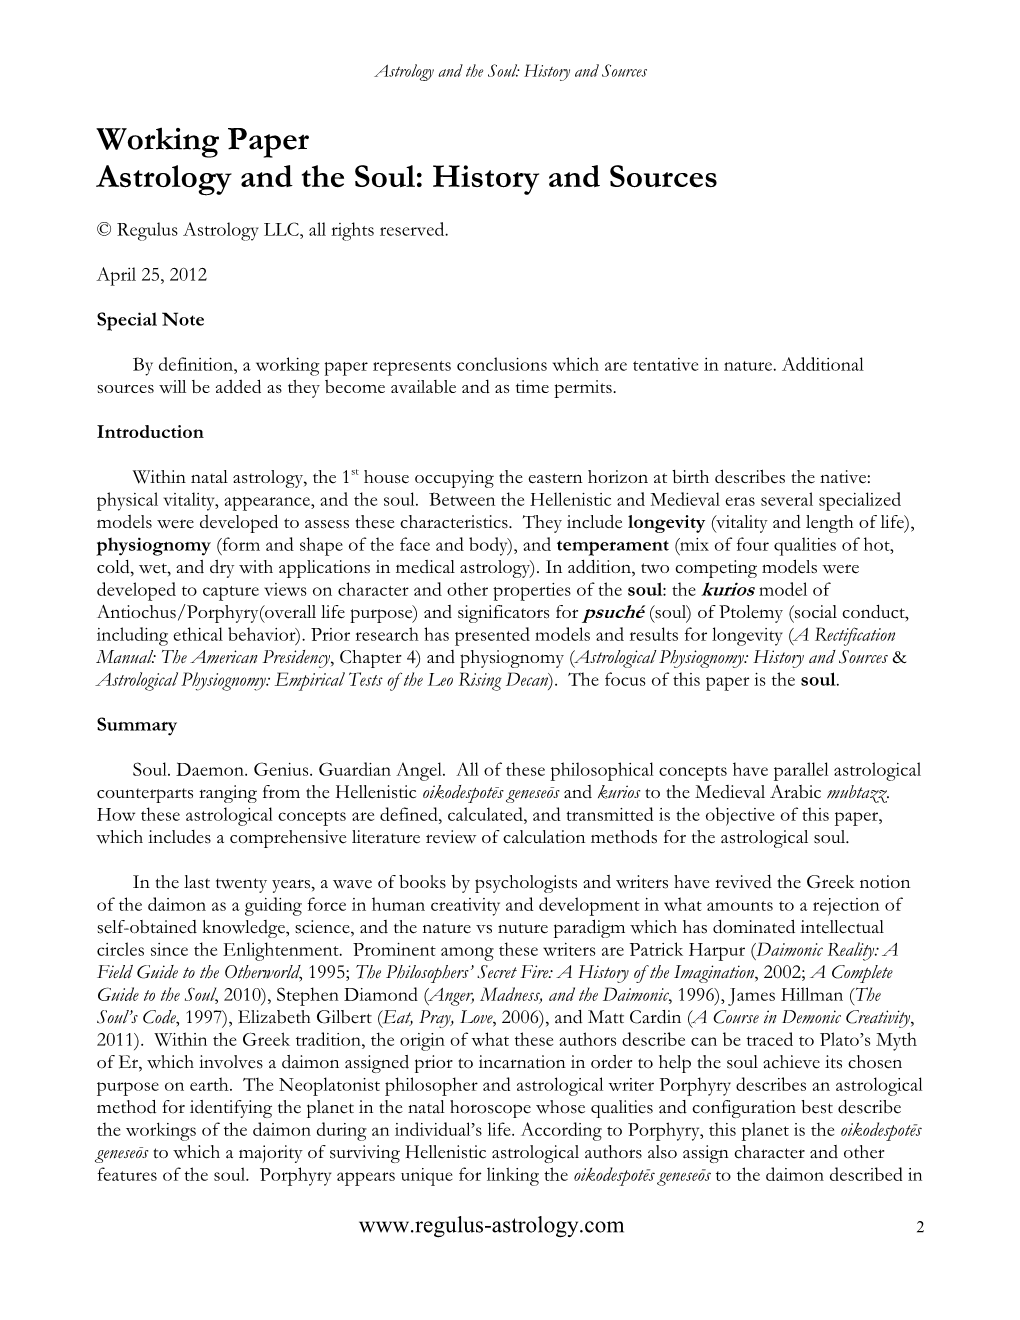 Astrology and the Soul: History and Sources